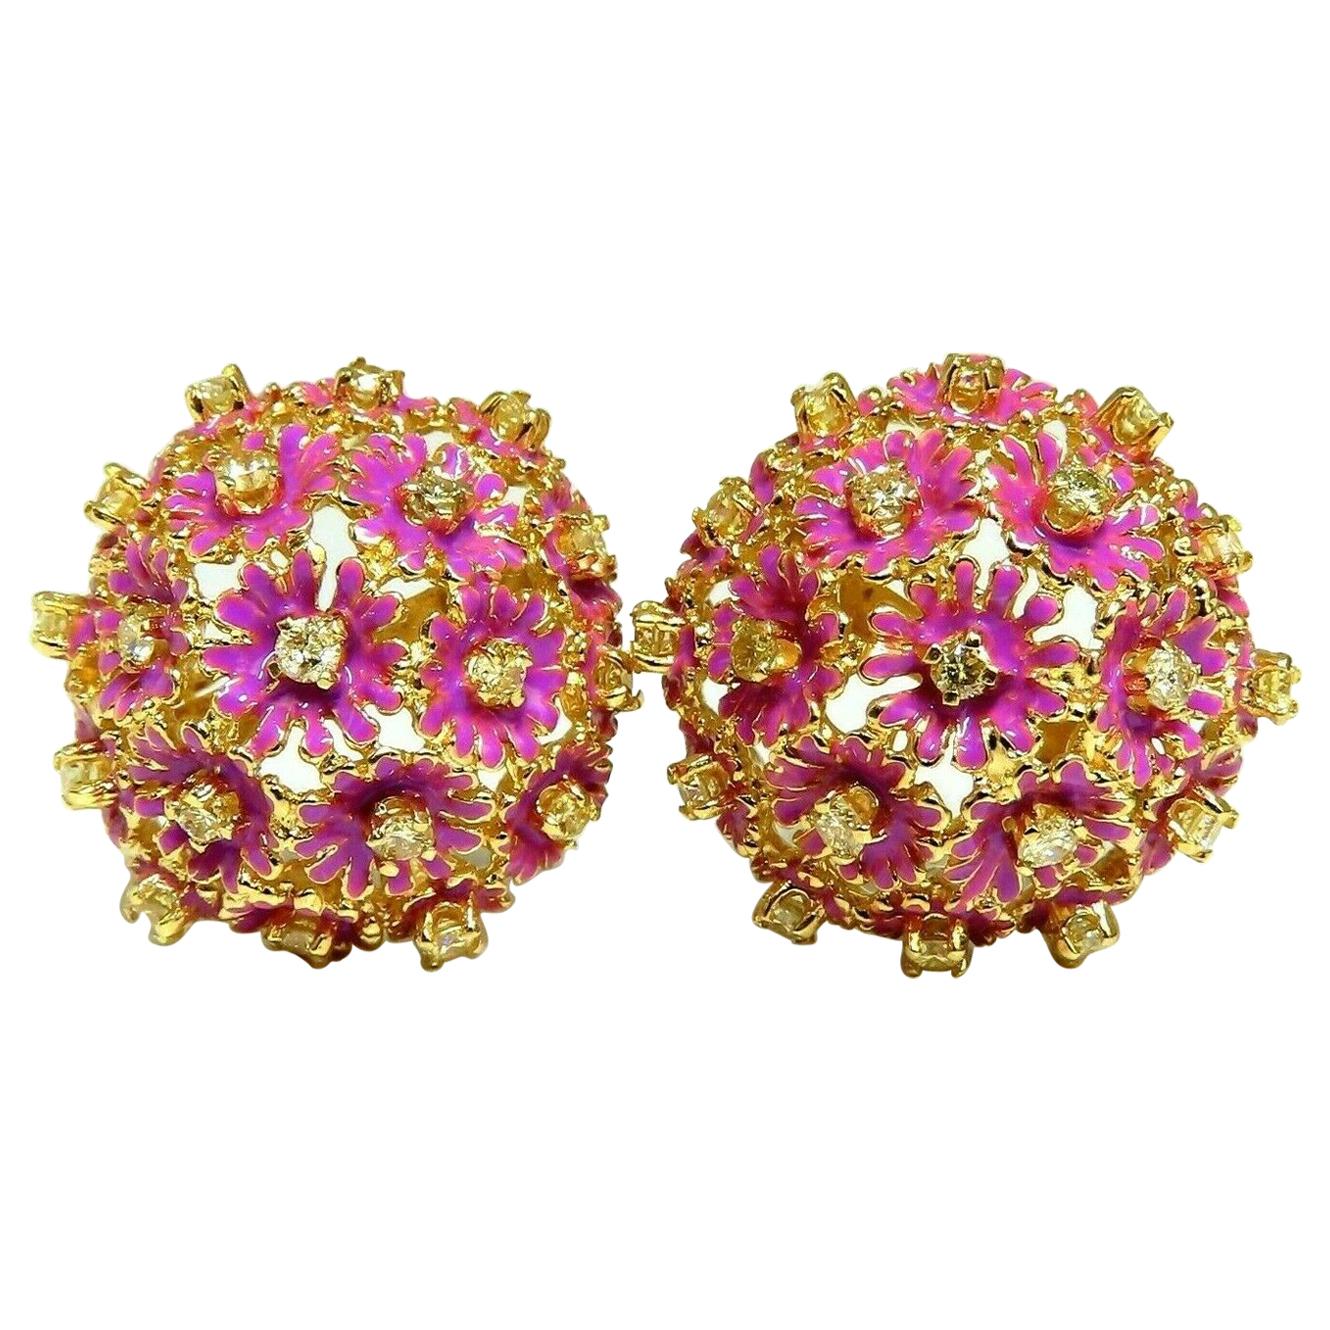 1.52ct Natural Fancy Yellow Diamonds Floral Dome Cluster Clip Earrings 14 Karat For Sale